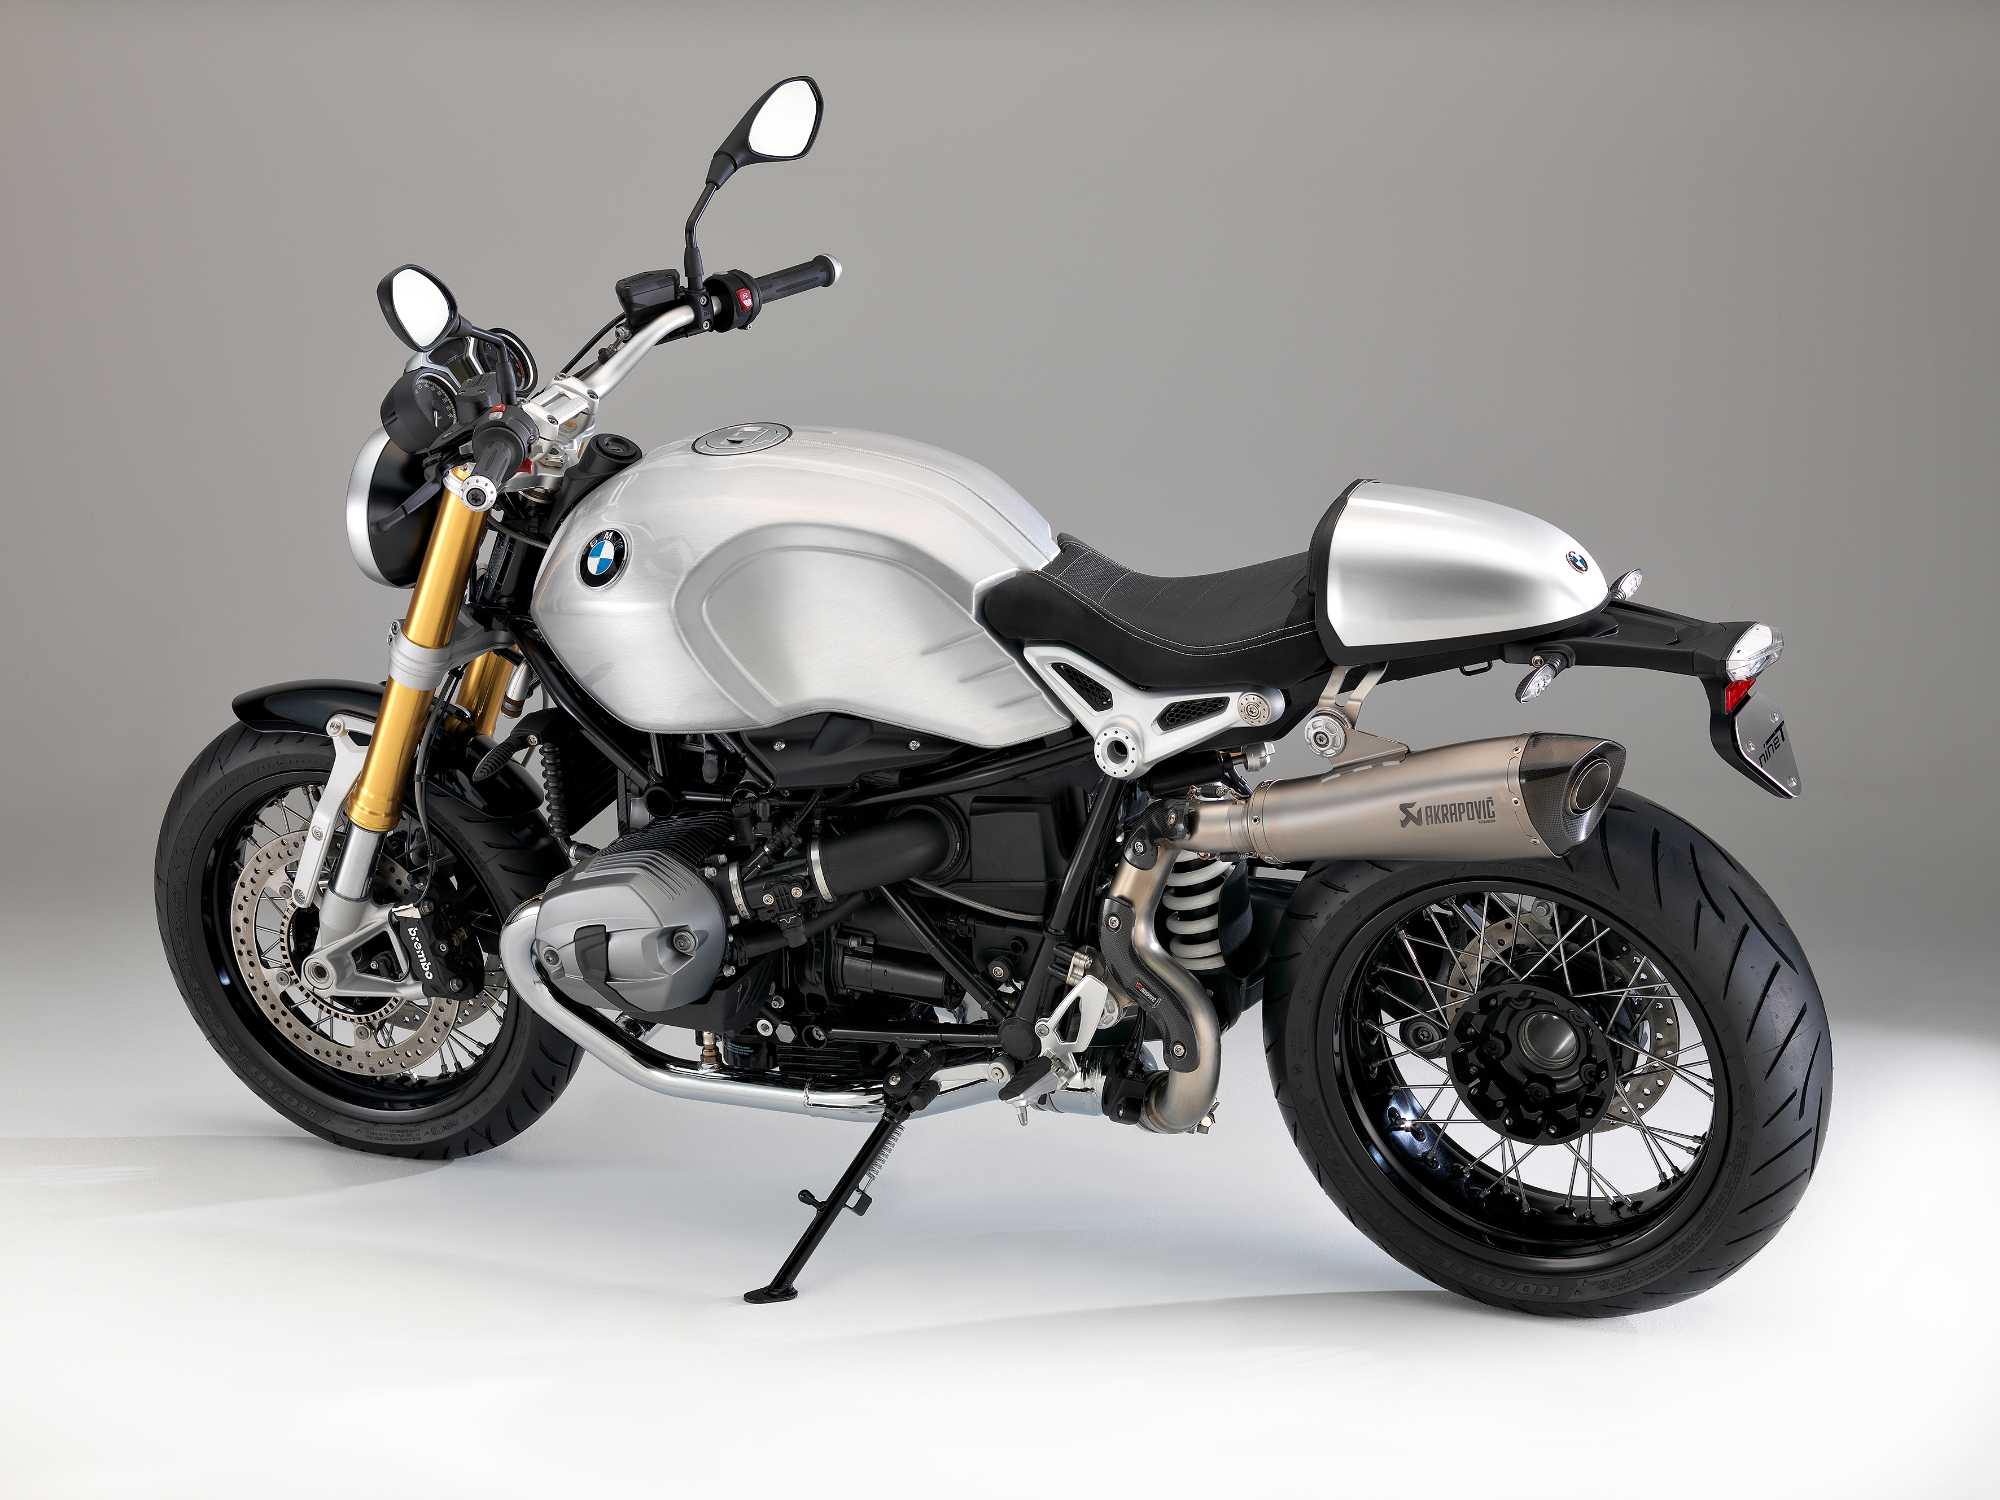 waterstof doorgaan kasteel BMW Motorrad expands Customizing range for the R nineT. Hand-brushed  aluminium fuel tanks give motorcycle hand-crafted character.